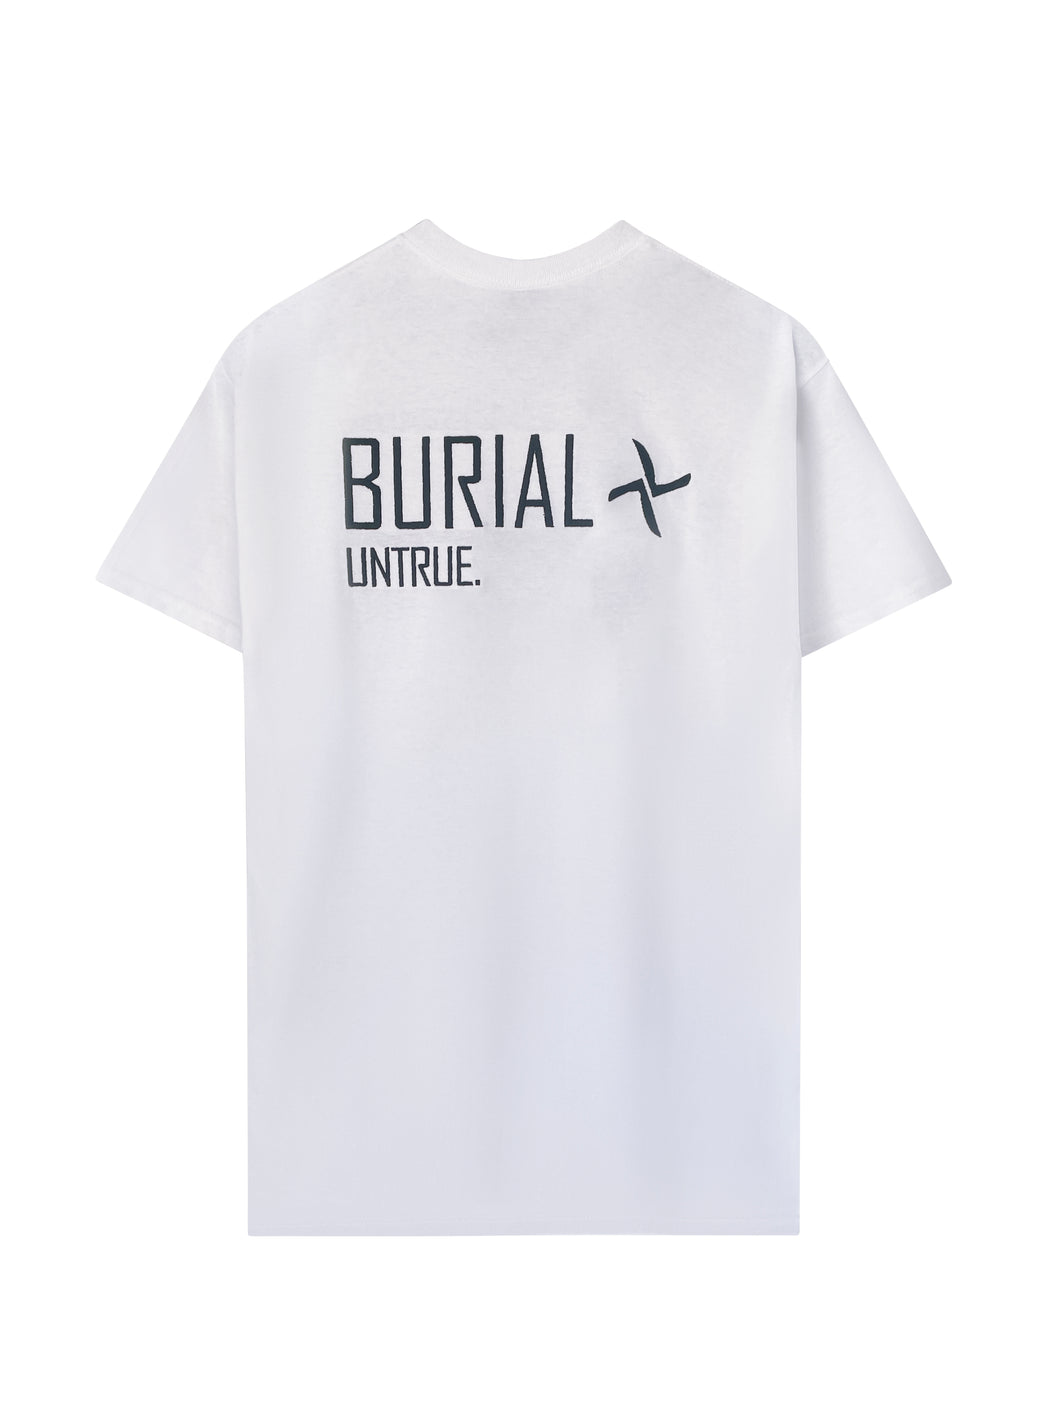 Burial - Untrue Front & Back Embroidery